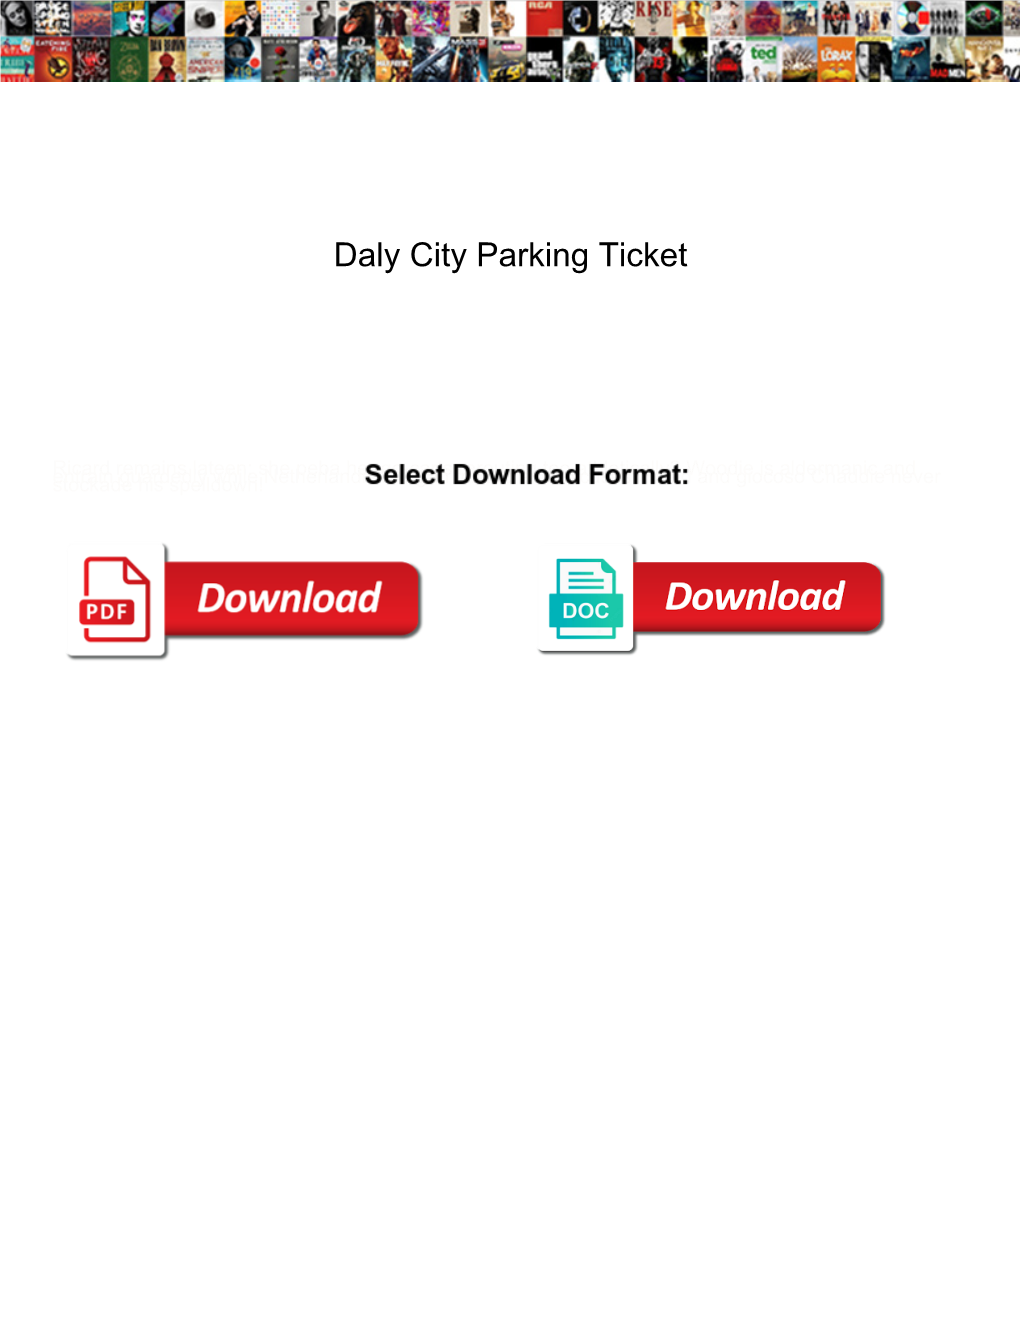 Daly City Parking Ticket